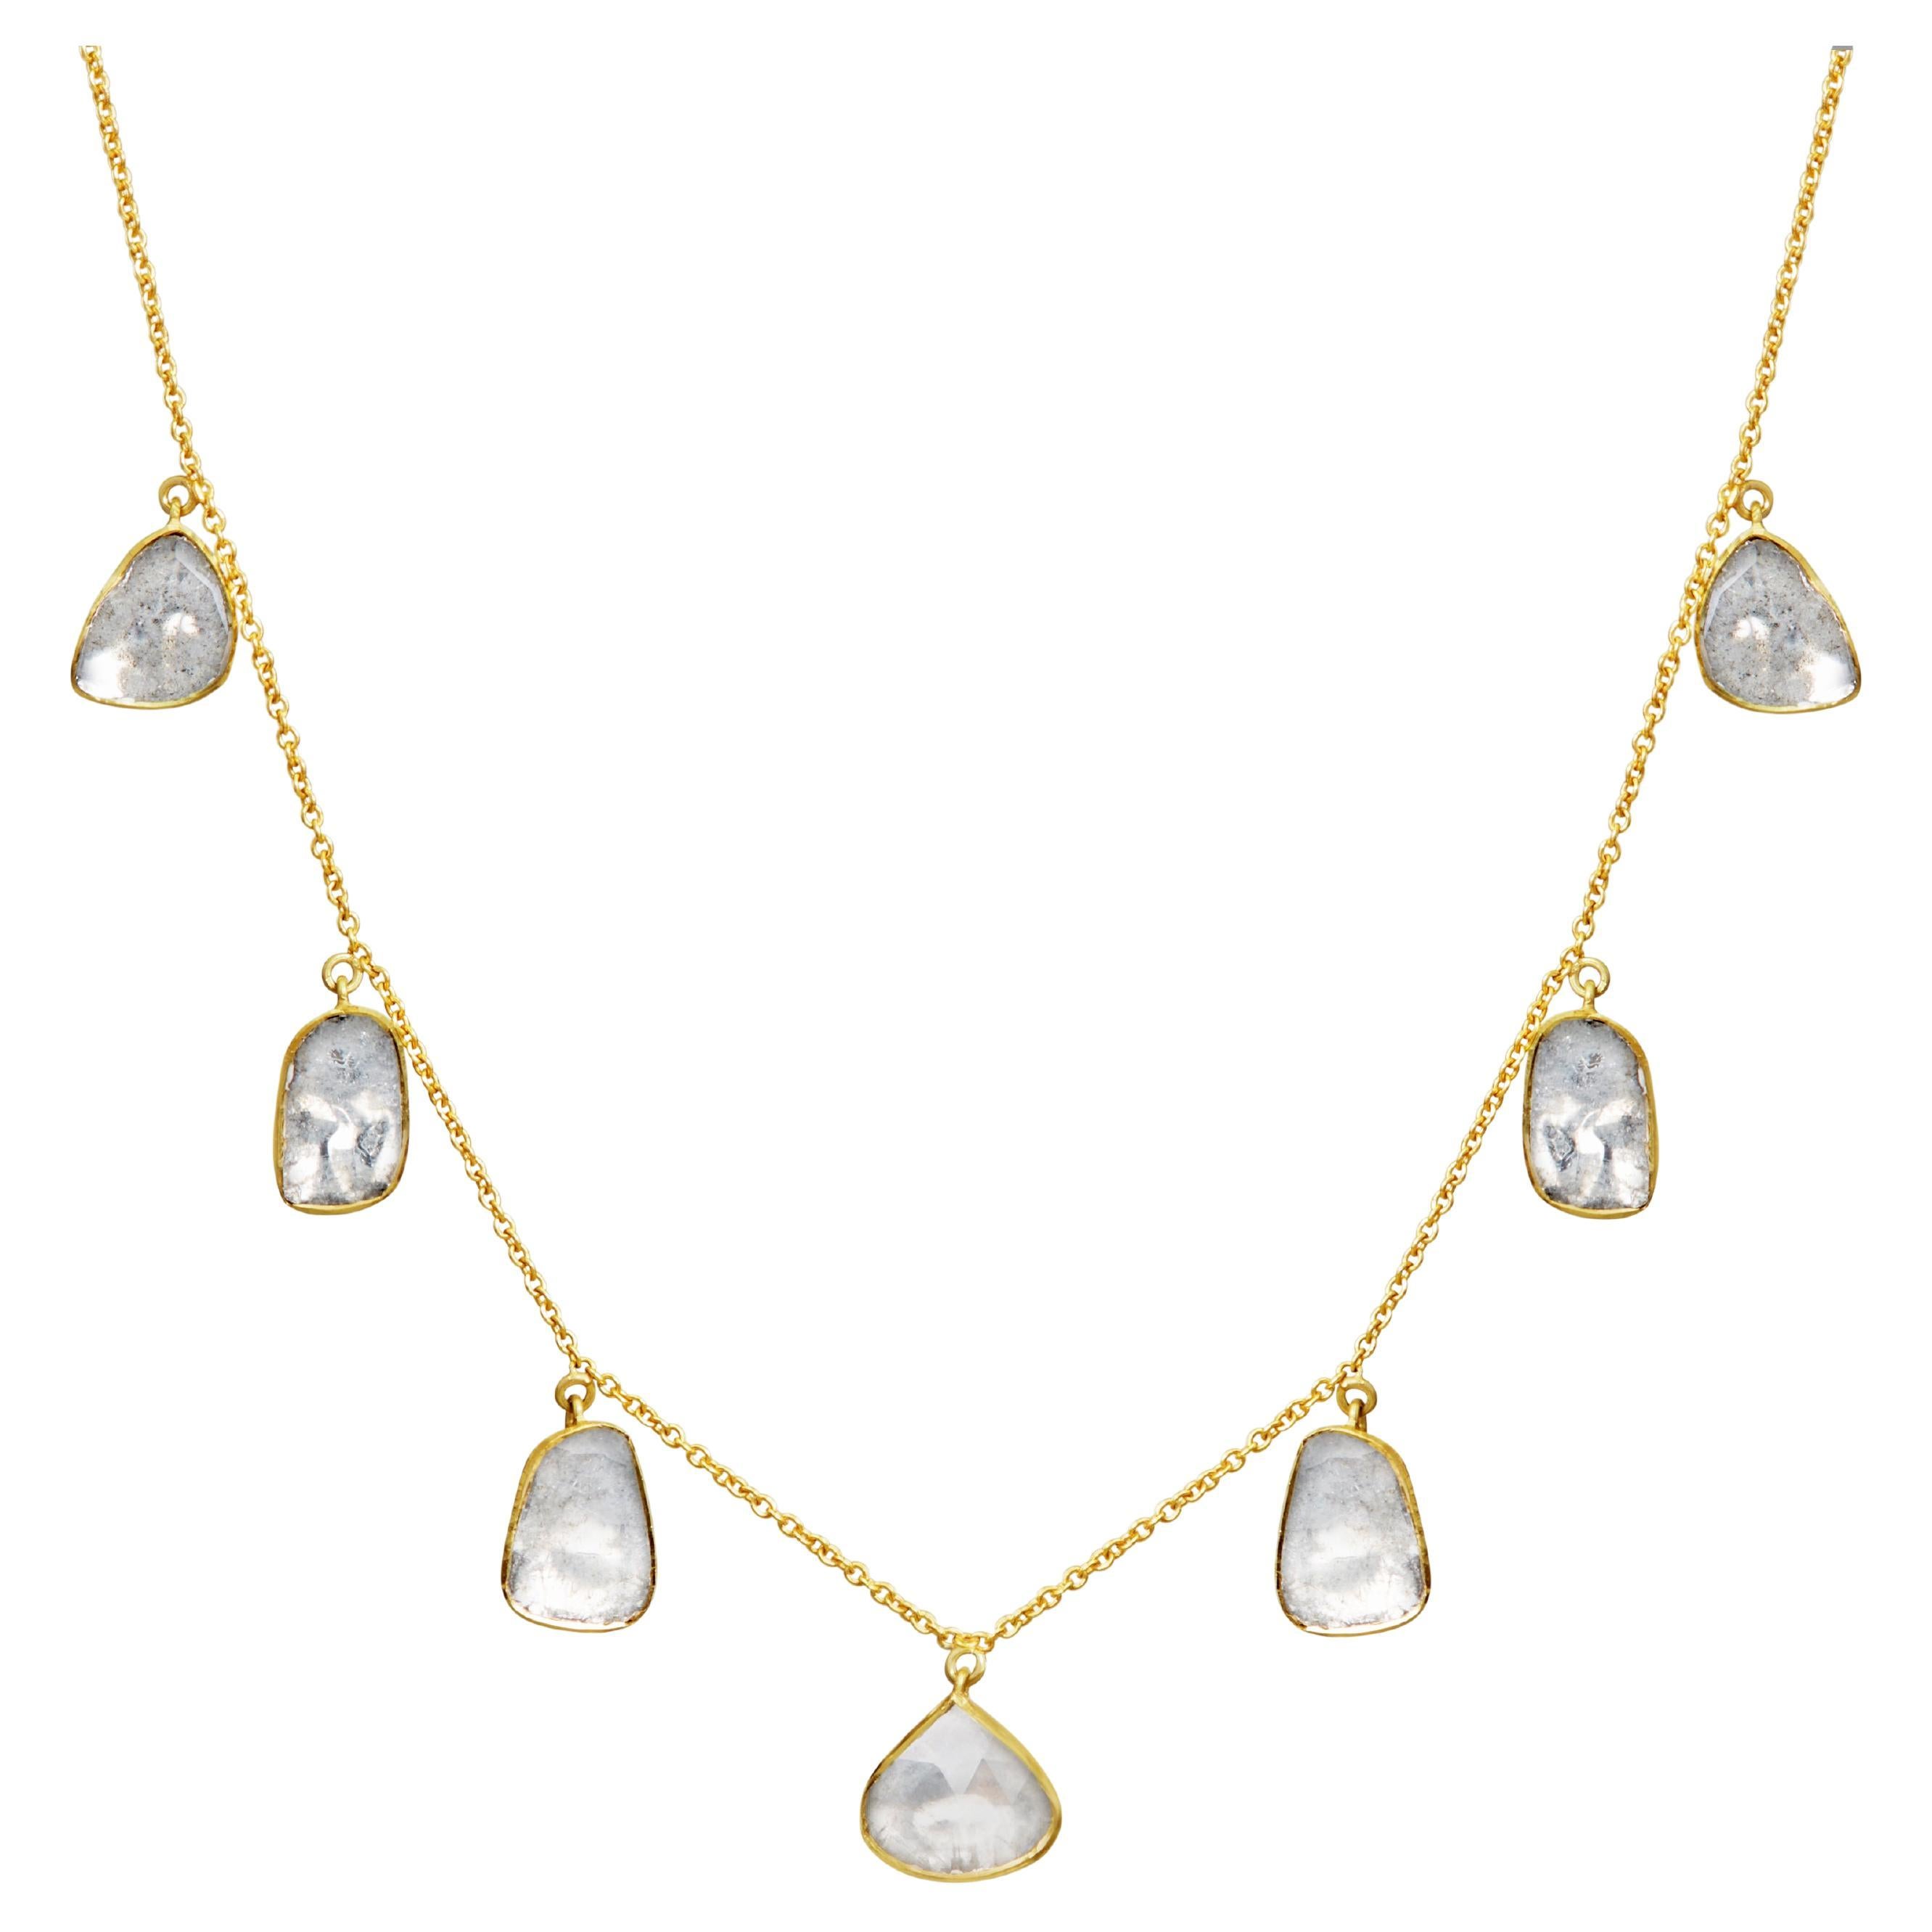 Seven Polki Diamonds Set In 18kt Gold And Hanging Along An 17" Chain For Sale